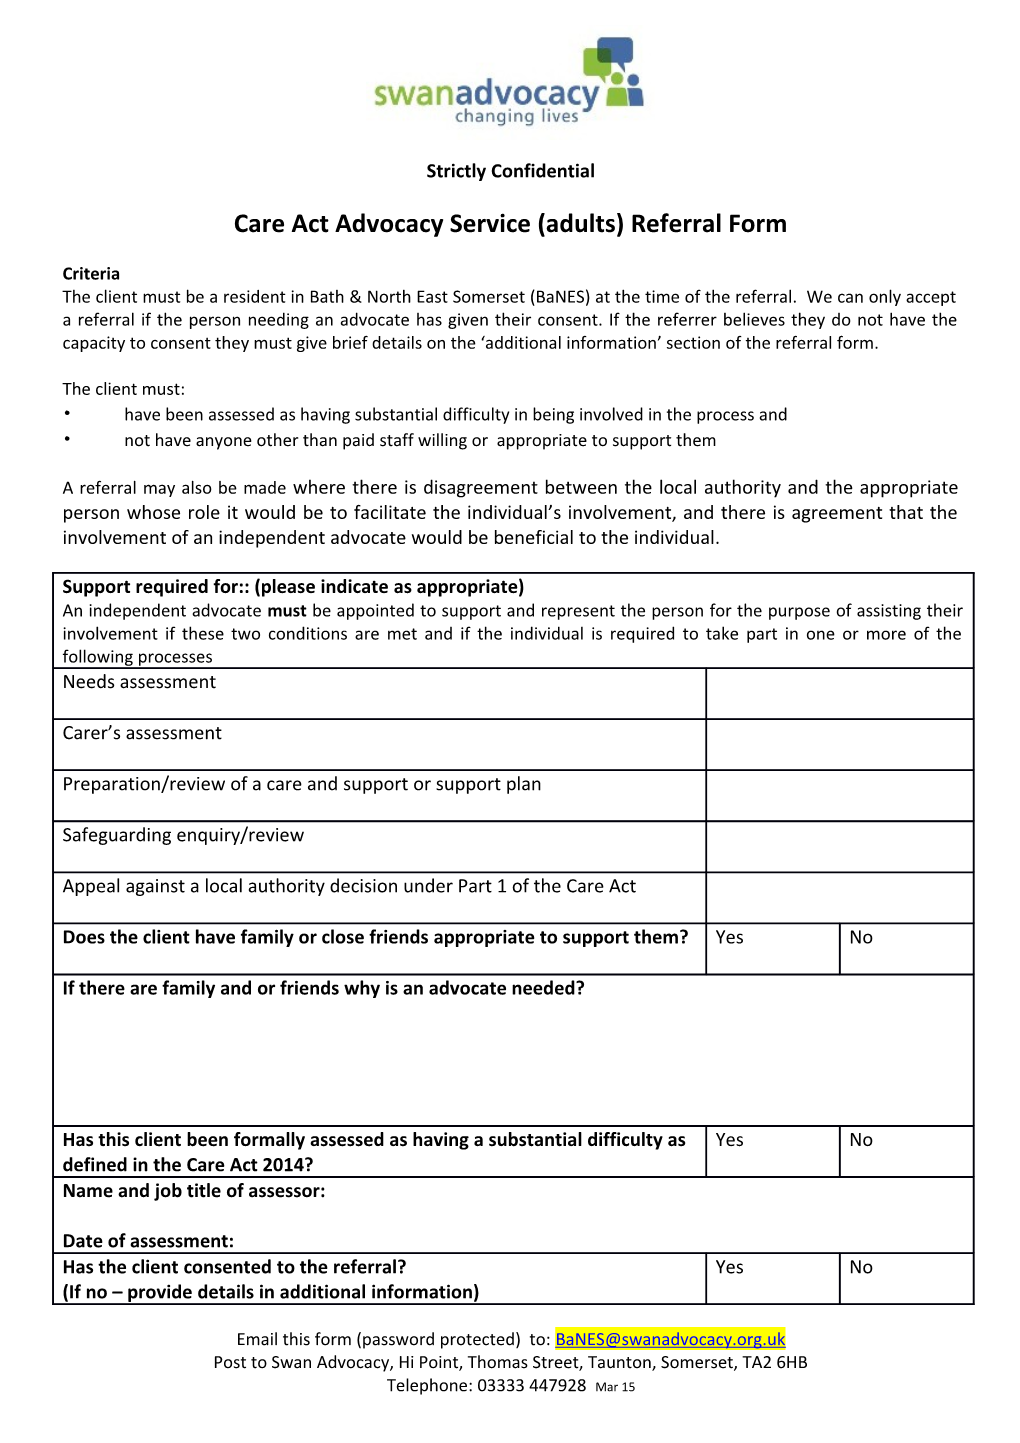 Care Act Advocacy Service (Adults) Referral Form